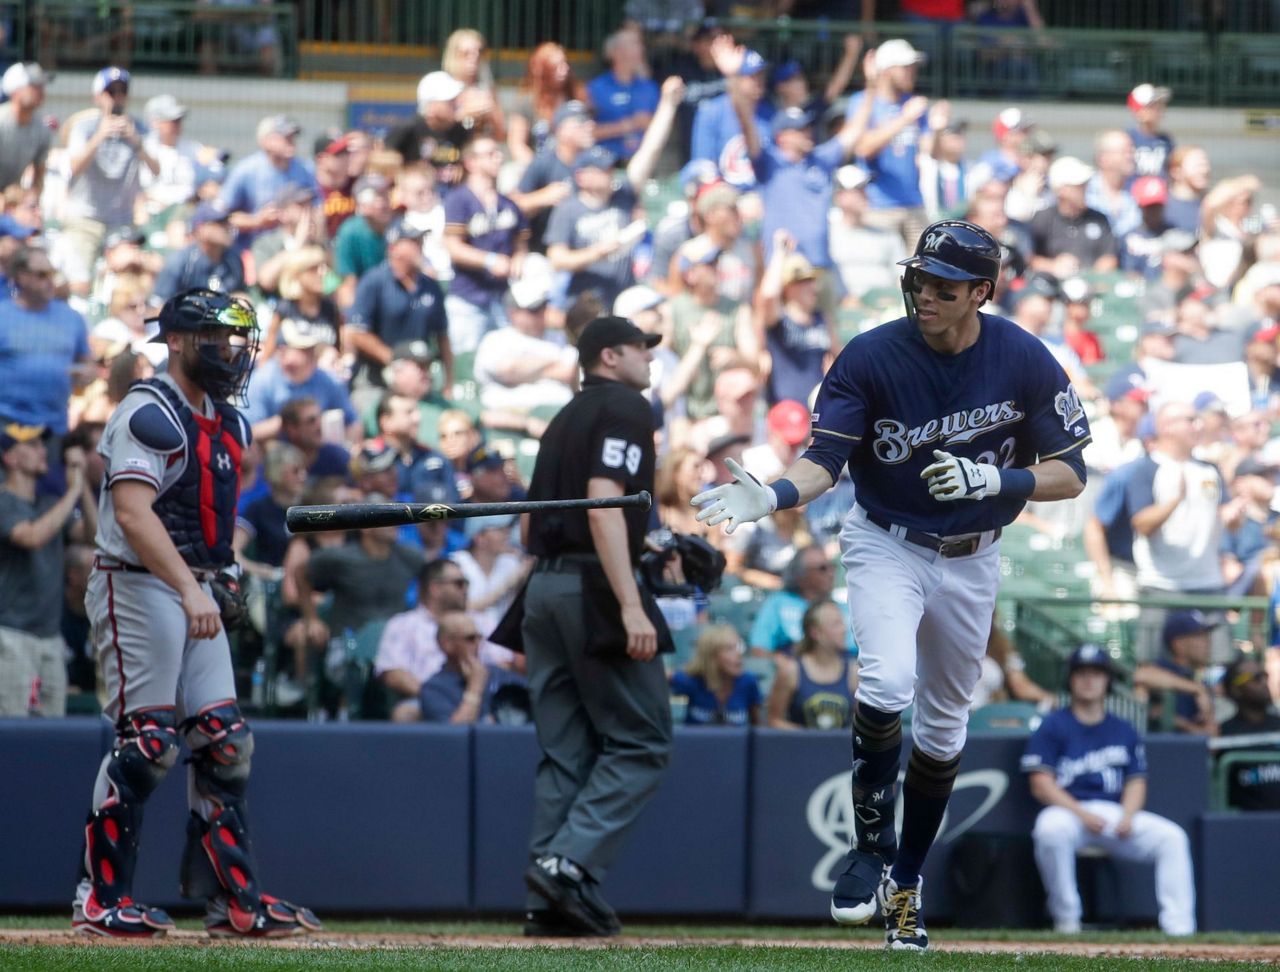 Brewers hang on for 54 win over Braves